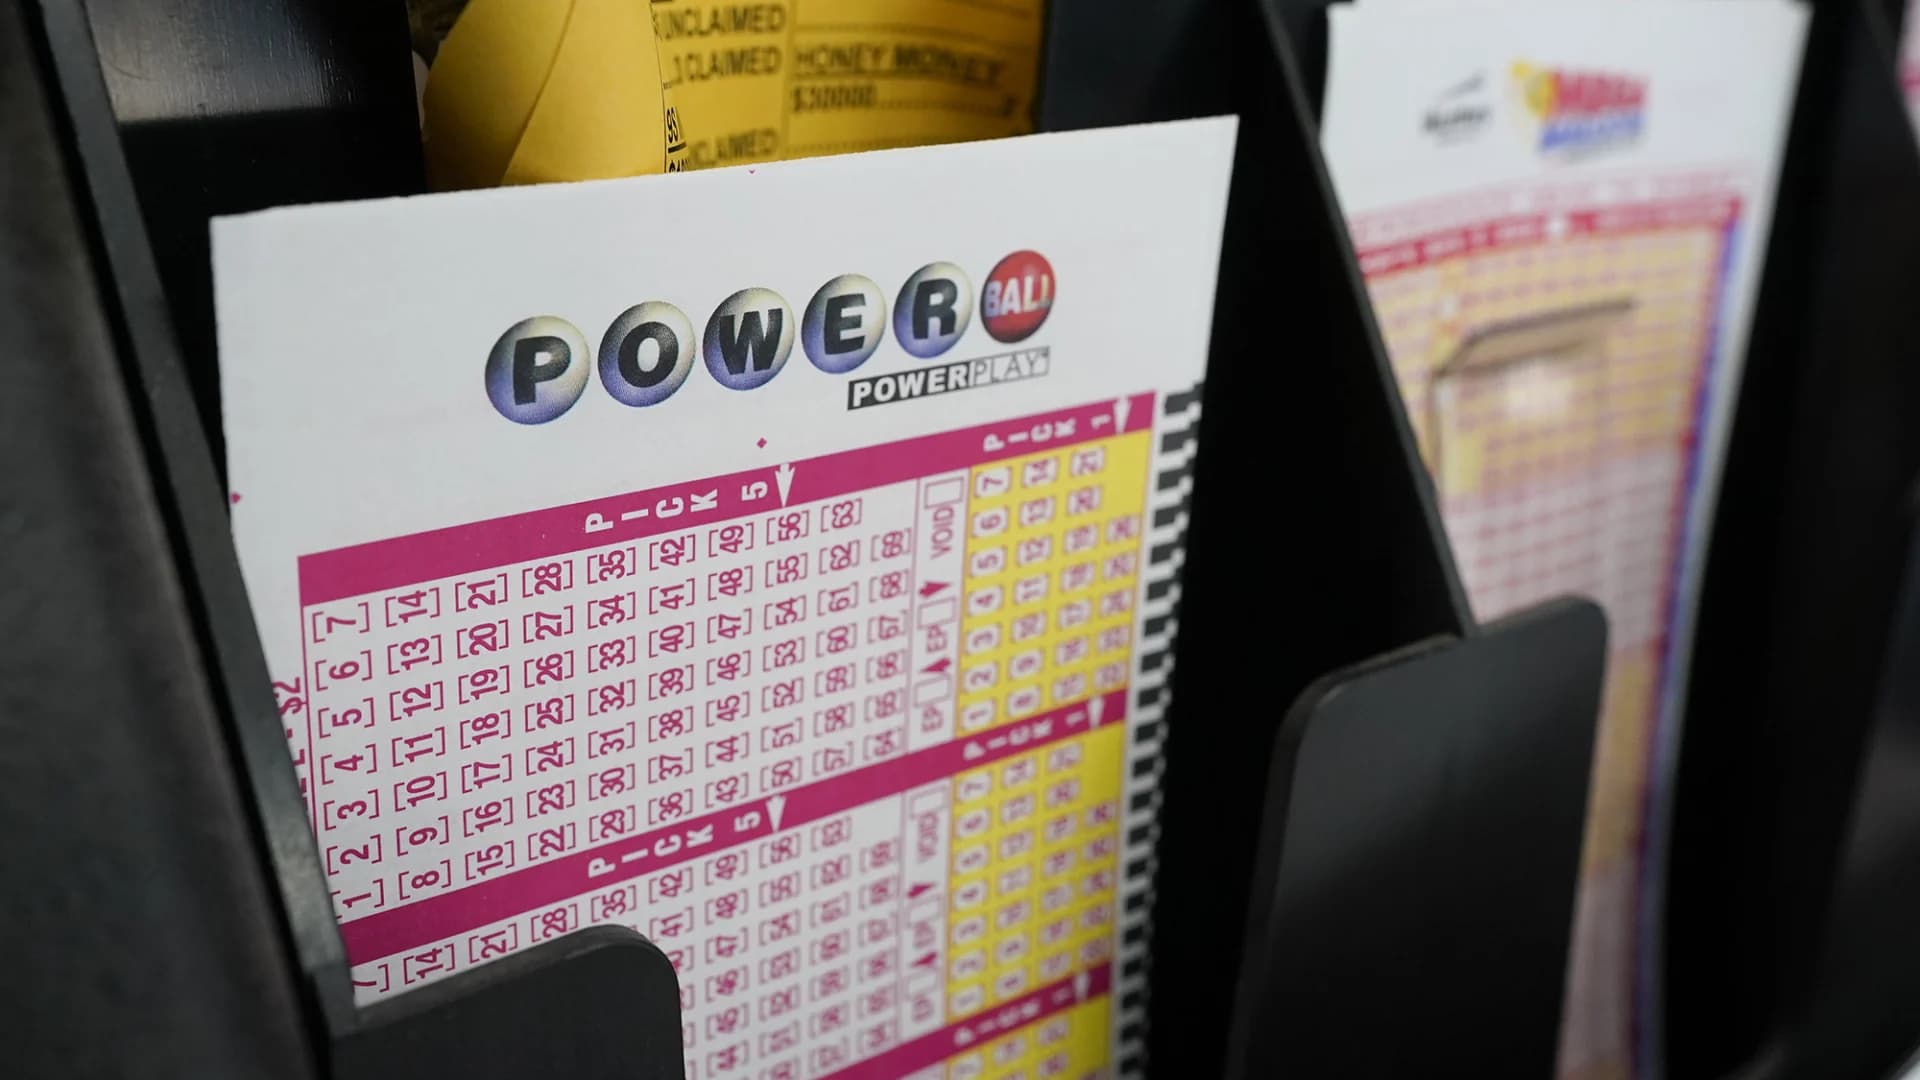 Another jackpot: Winning $33.2 million Powerball ticket sold in New Jersey